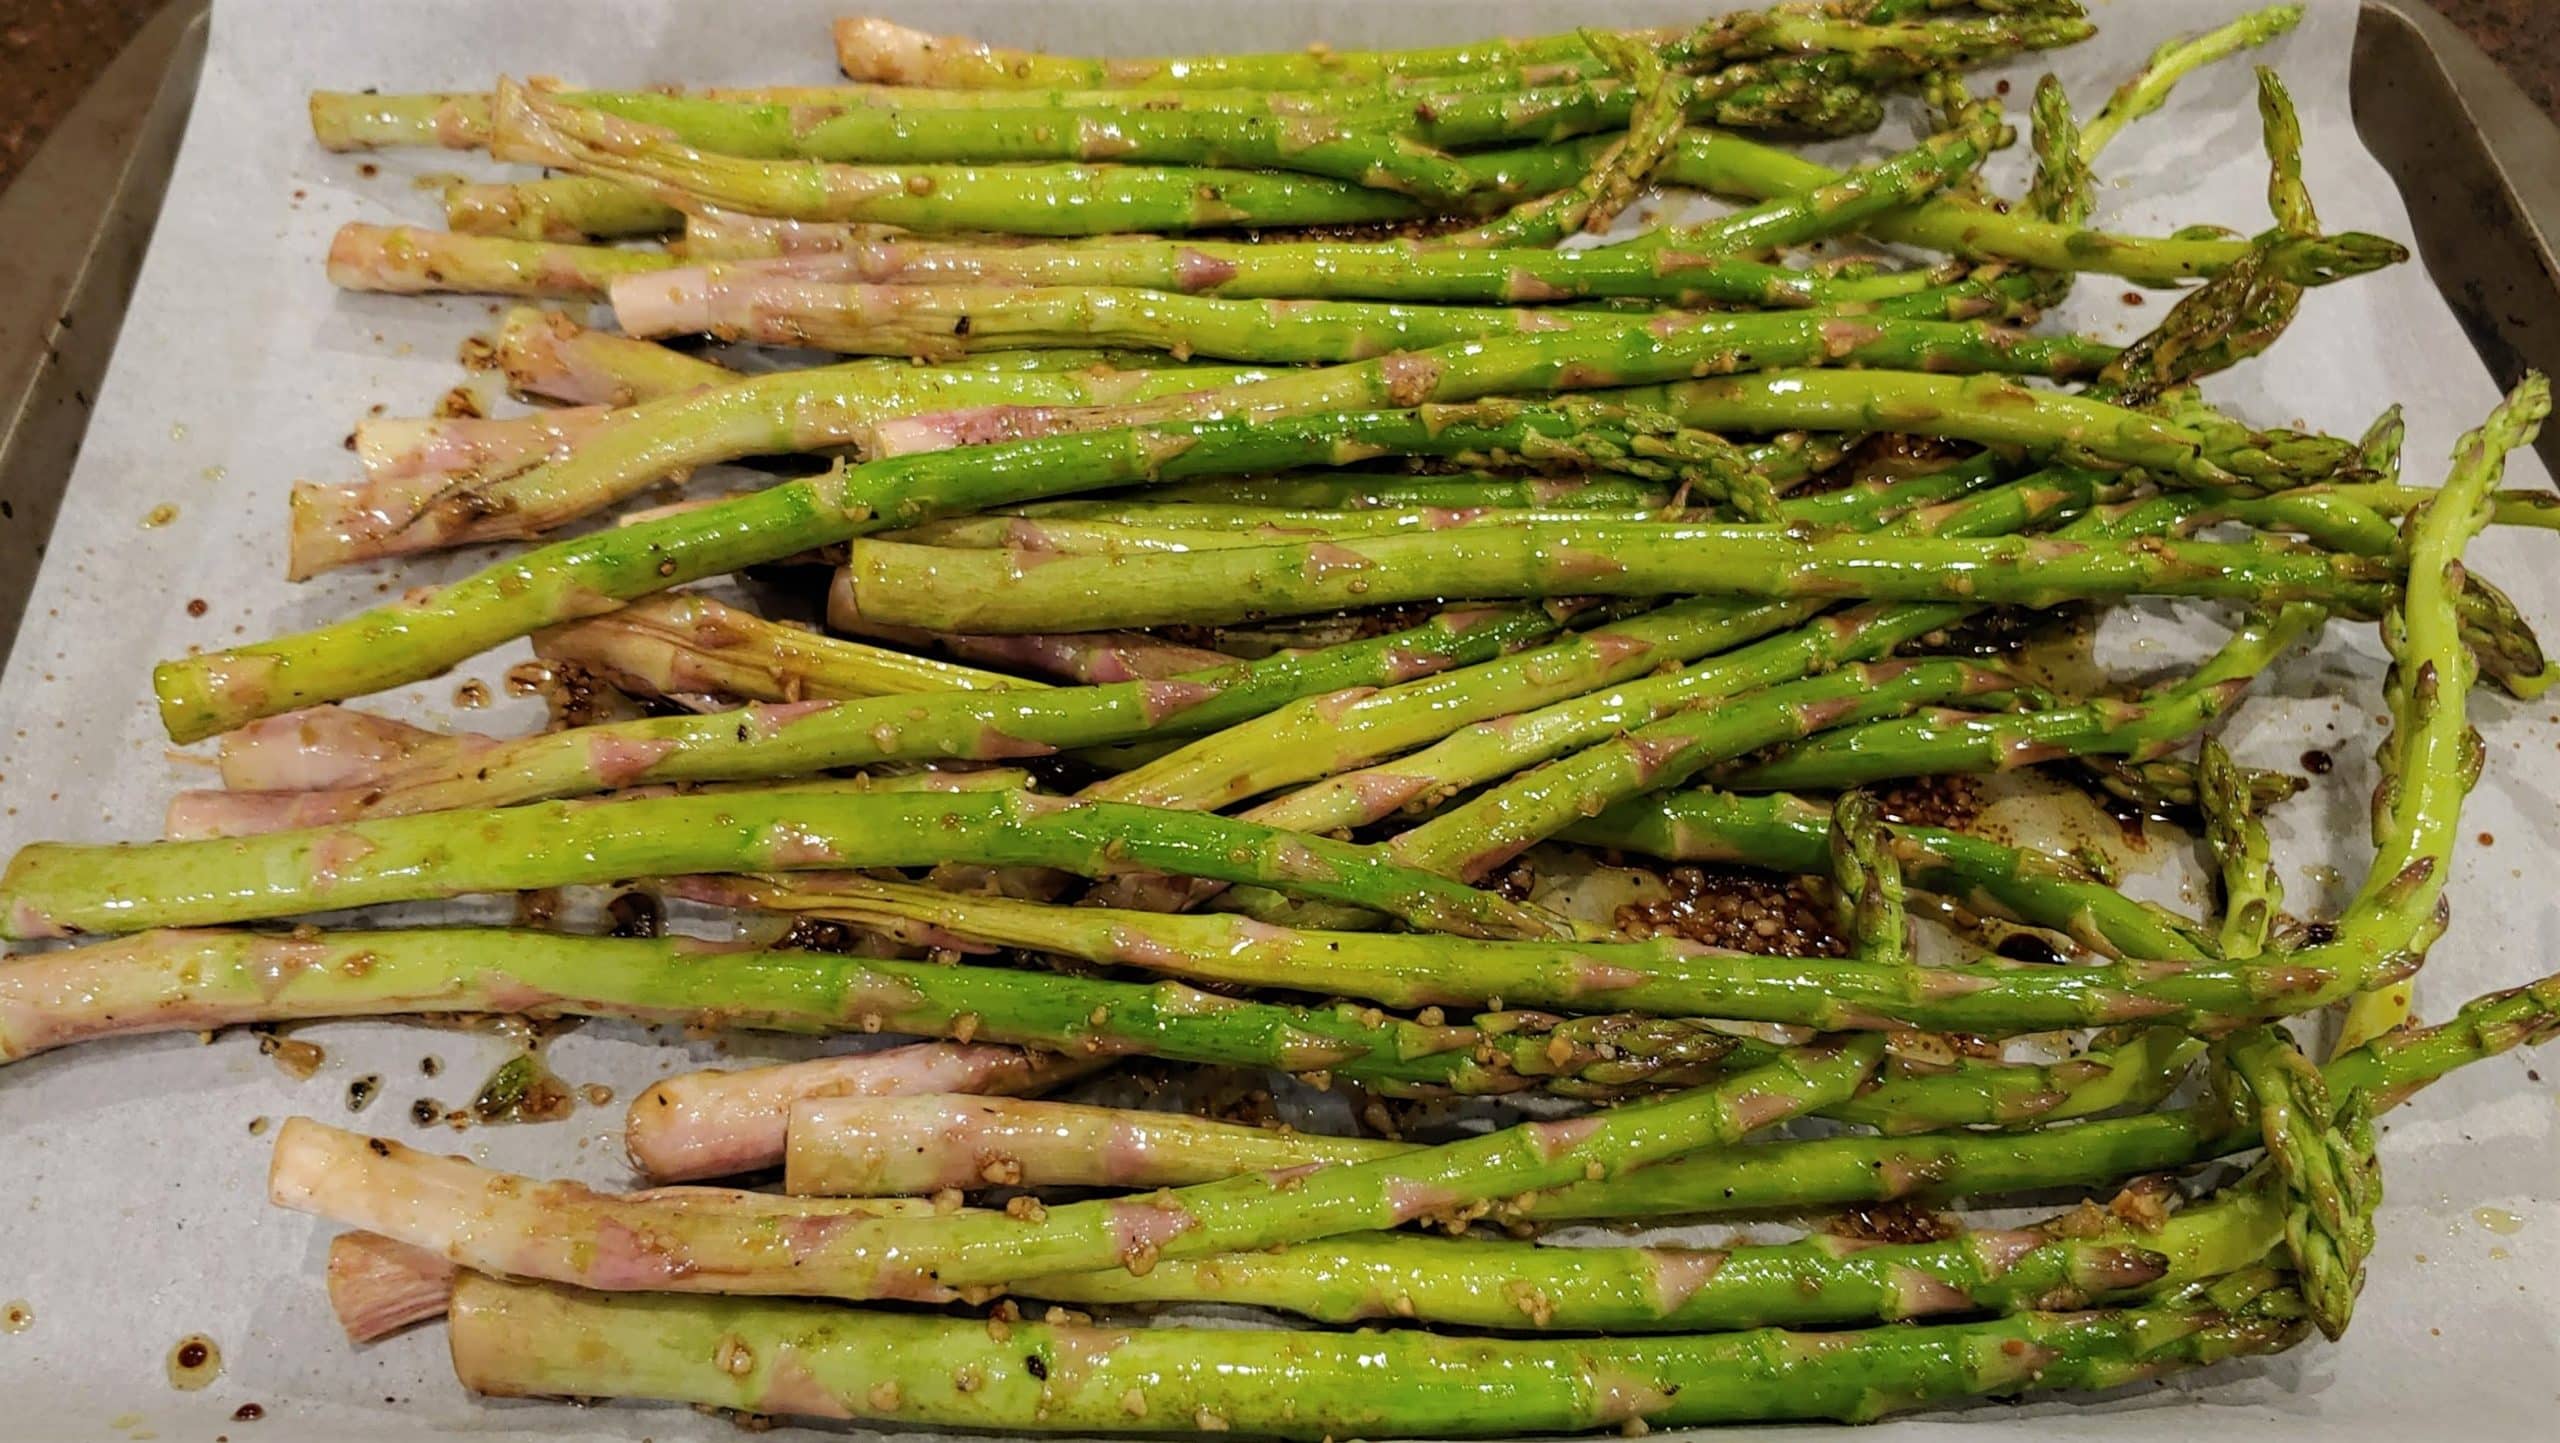 Asparagus with Garlic Balsamic Marinade - Dining in with Danielle